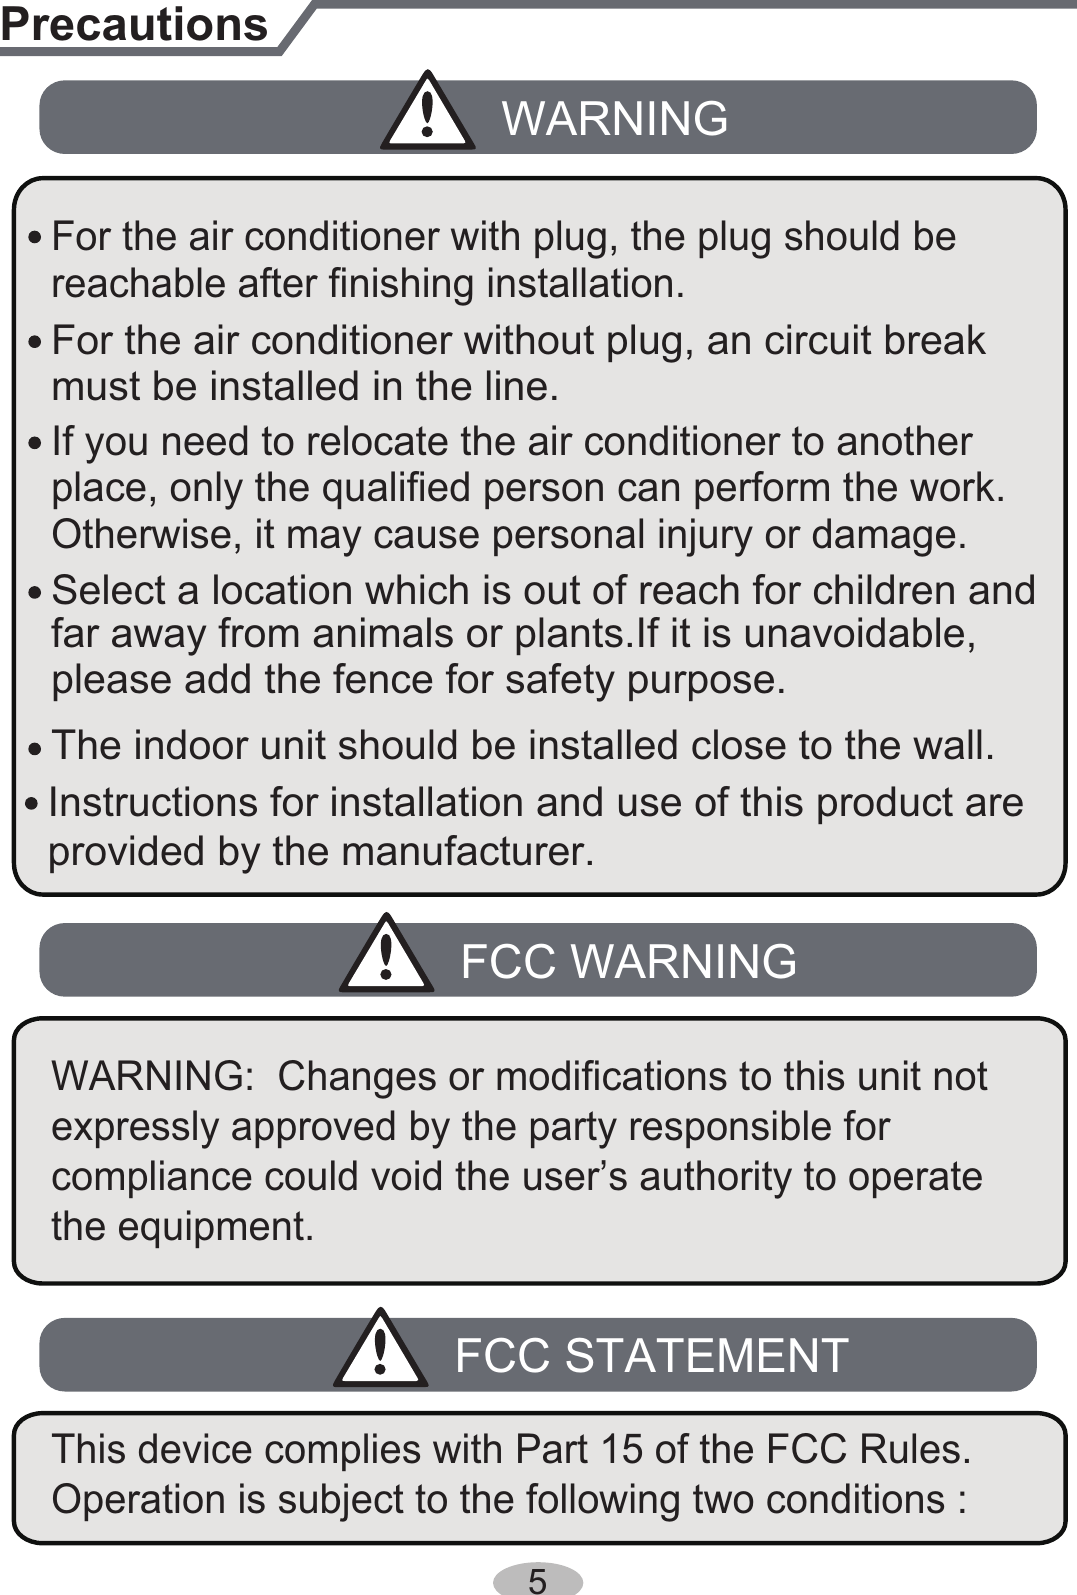 The indoor unit should be installed close to the wall. reachable after finishing installation.far away from animals or plants.If it is unavoidable, please add the fence for safety purpose.PrecautionsWARNINGFCC WARNINGplace, only the qualified person can perform the work. Otherwise, it may cause personal injury or damage.If you need to relocate the air conditioner to another must be installed in the line.For the air conditioner without plug, an circuit break Select a location which is out of reach for children and For the air conditioner with plug, the plug should be  5Instructions for installation and use of this product are provided by the manufacturer. expressly approved by the party responsible for compliance could void the user’s authority to operate the equipment.WARNING:  Changes or modifications to this unit not FCC STATEMENTOperation is subject to the following two conditions : This device complies with Part 15 of the FCC Rules. 